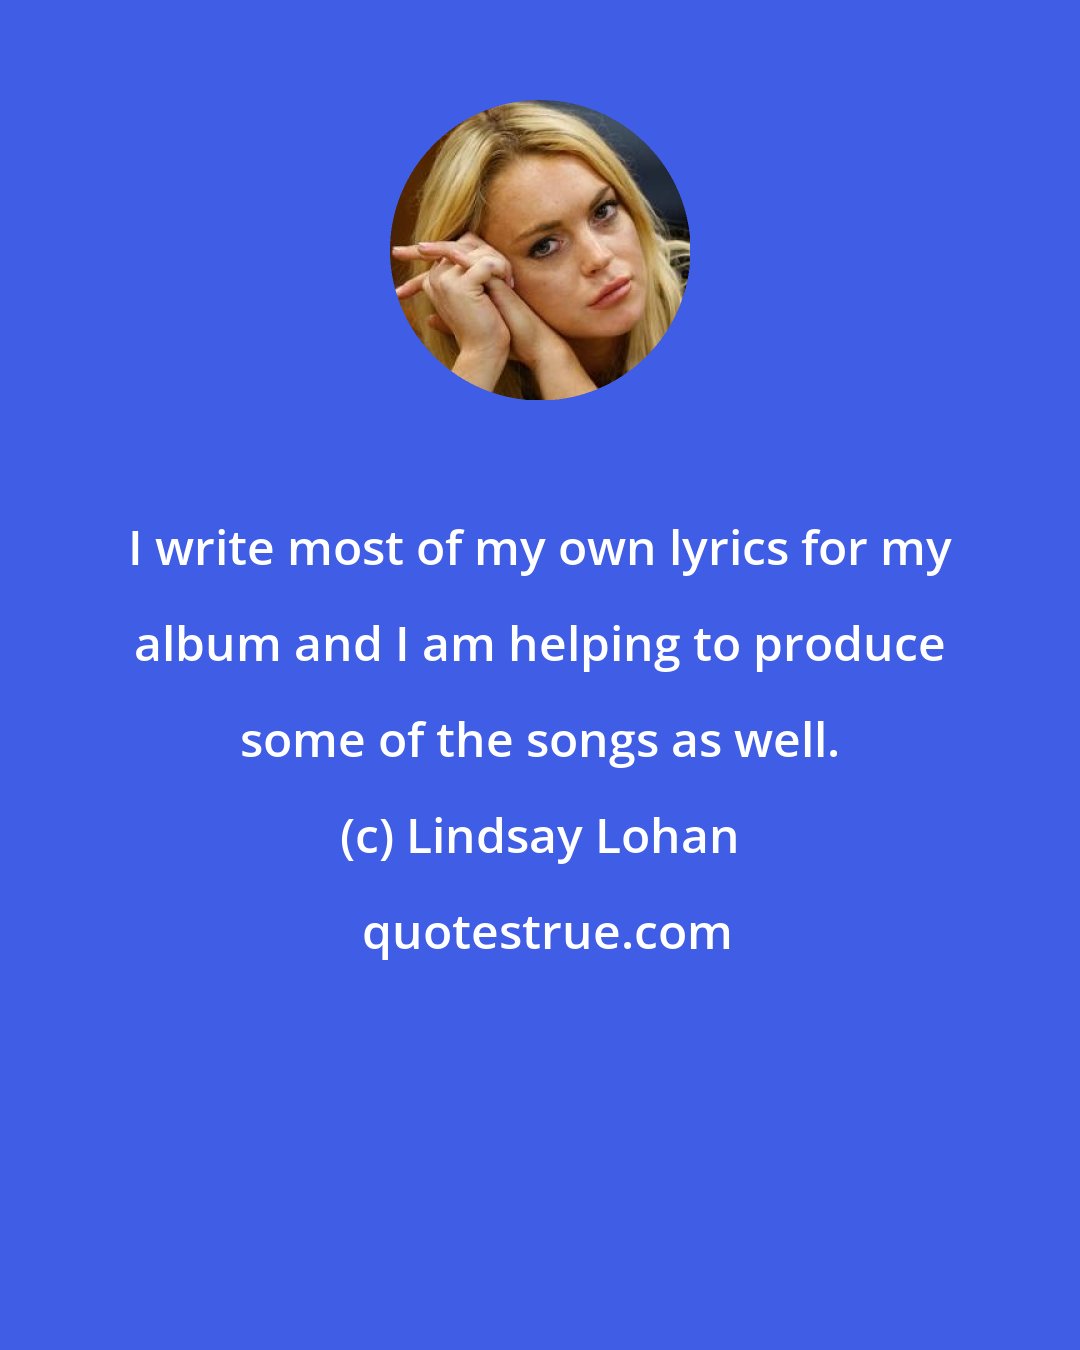 Lindsay Lohan: I write most of my own lyrics for my album and I am helping to produce some of the songs as well.